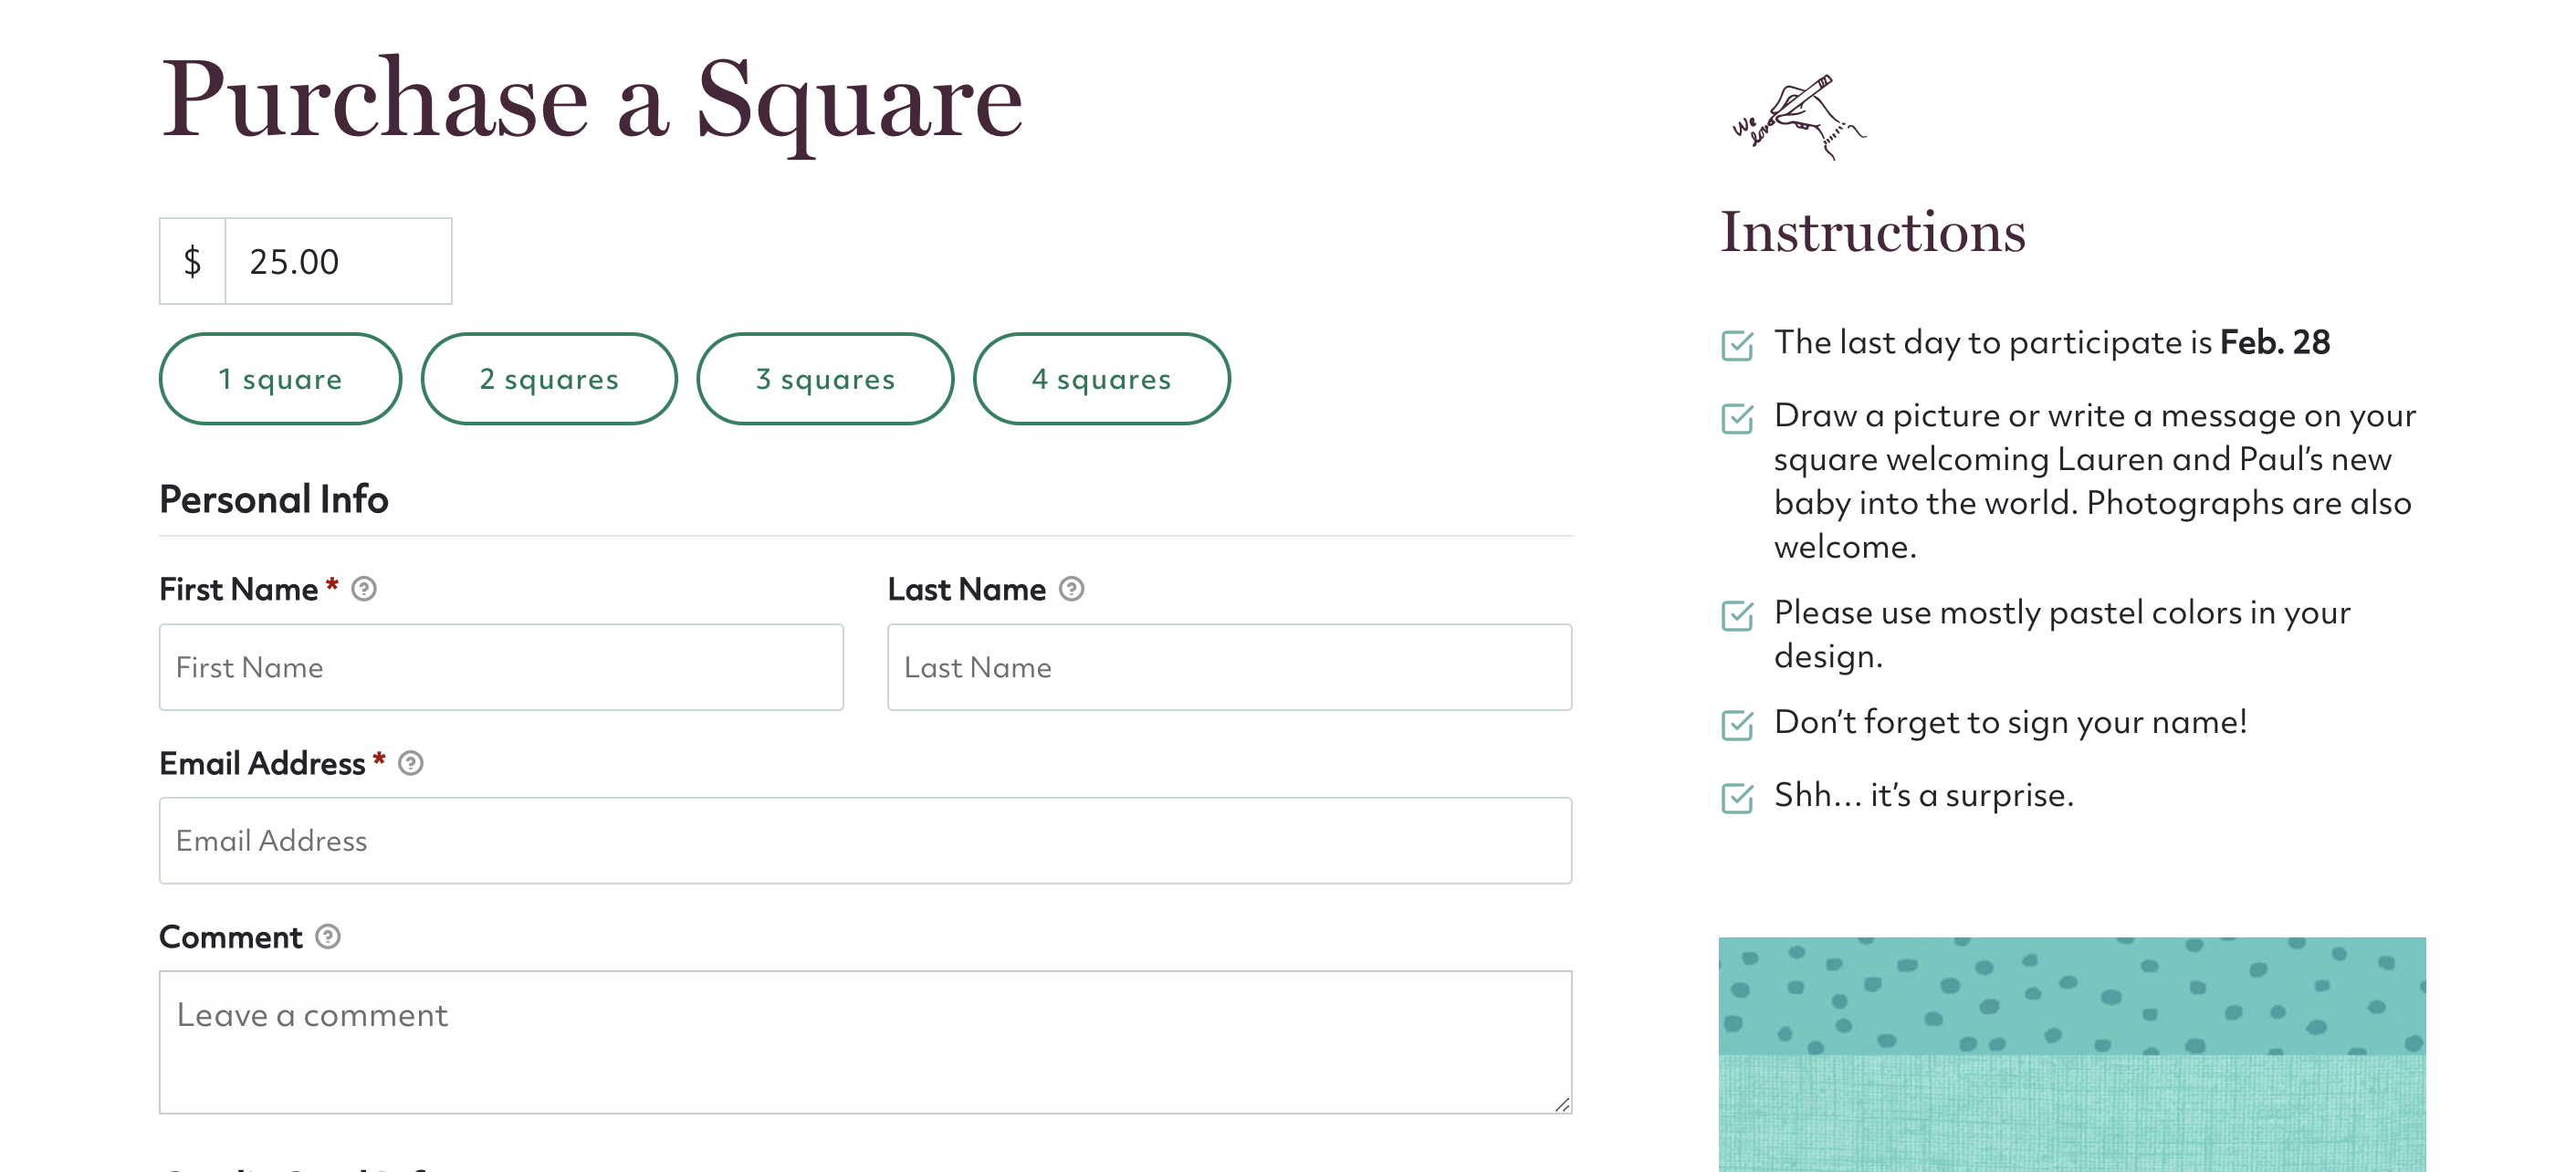 A screenshot of a sample Quiltlove form. It directs the participant to select the number of squares they want to purchase towards the quilt. On the right, there are some instructions including the last day to participate, info on drawing and submitting artwork, and info on the color story